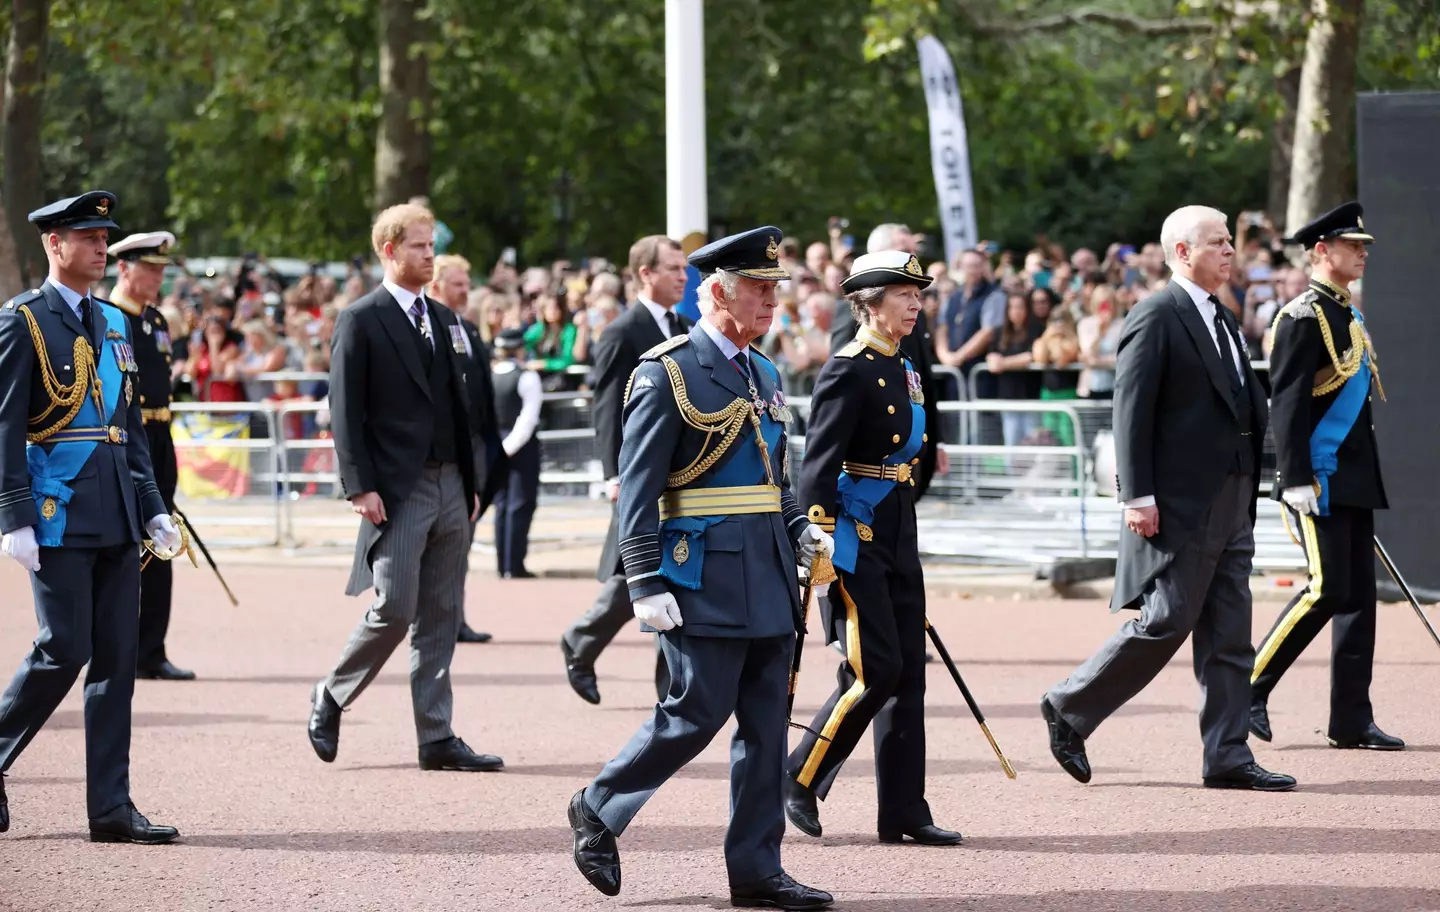 Prince Harry and Prince Andrew wore suits during the procession earlier this week.